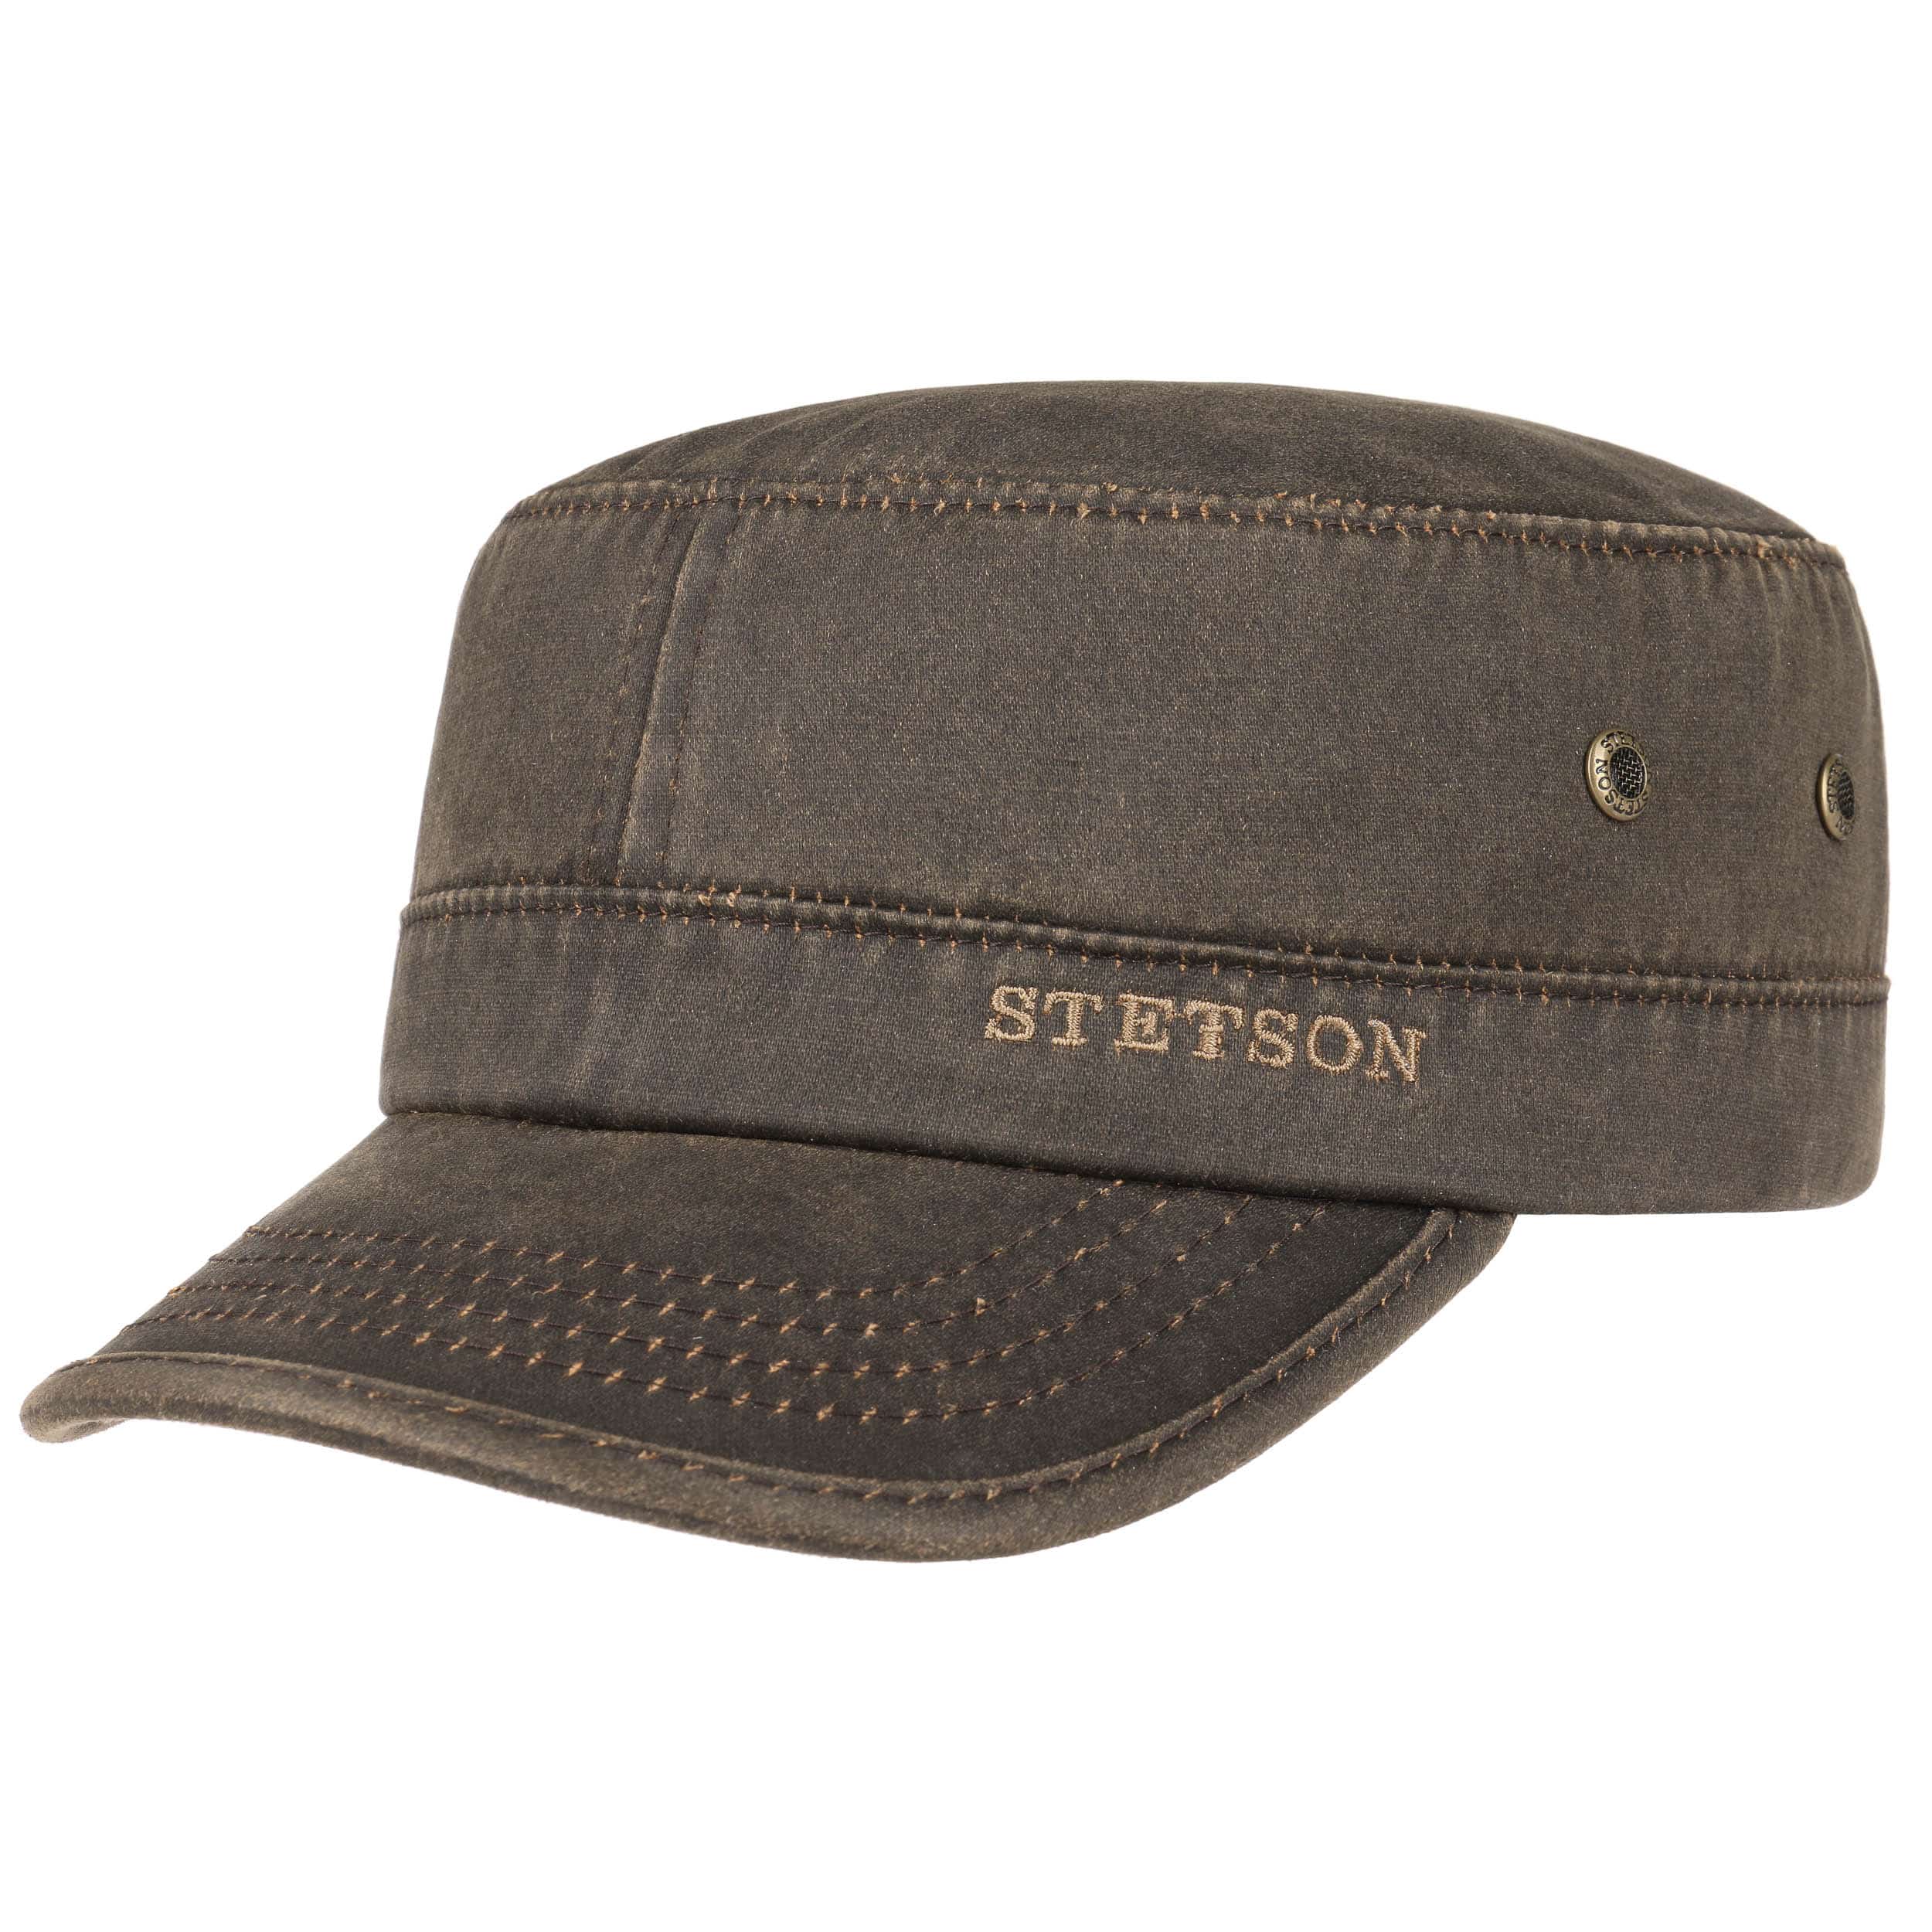 Datto by Stetson - 39,00 €